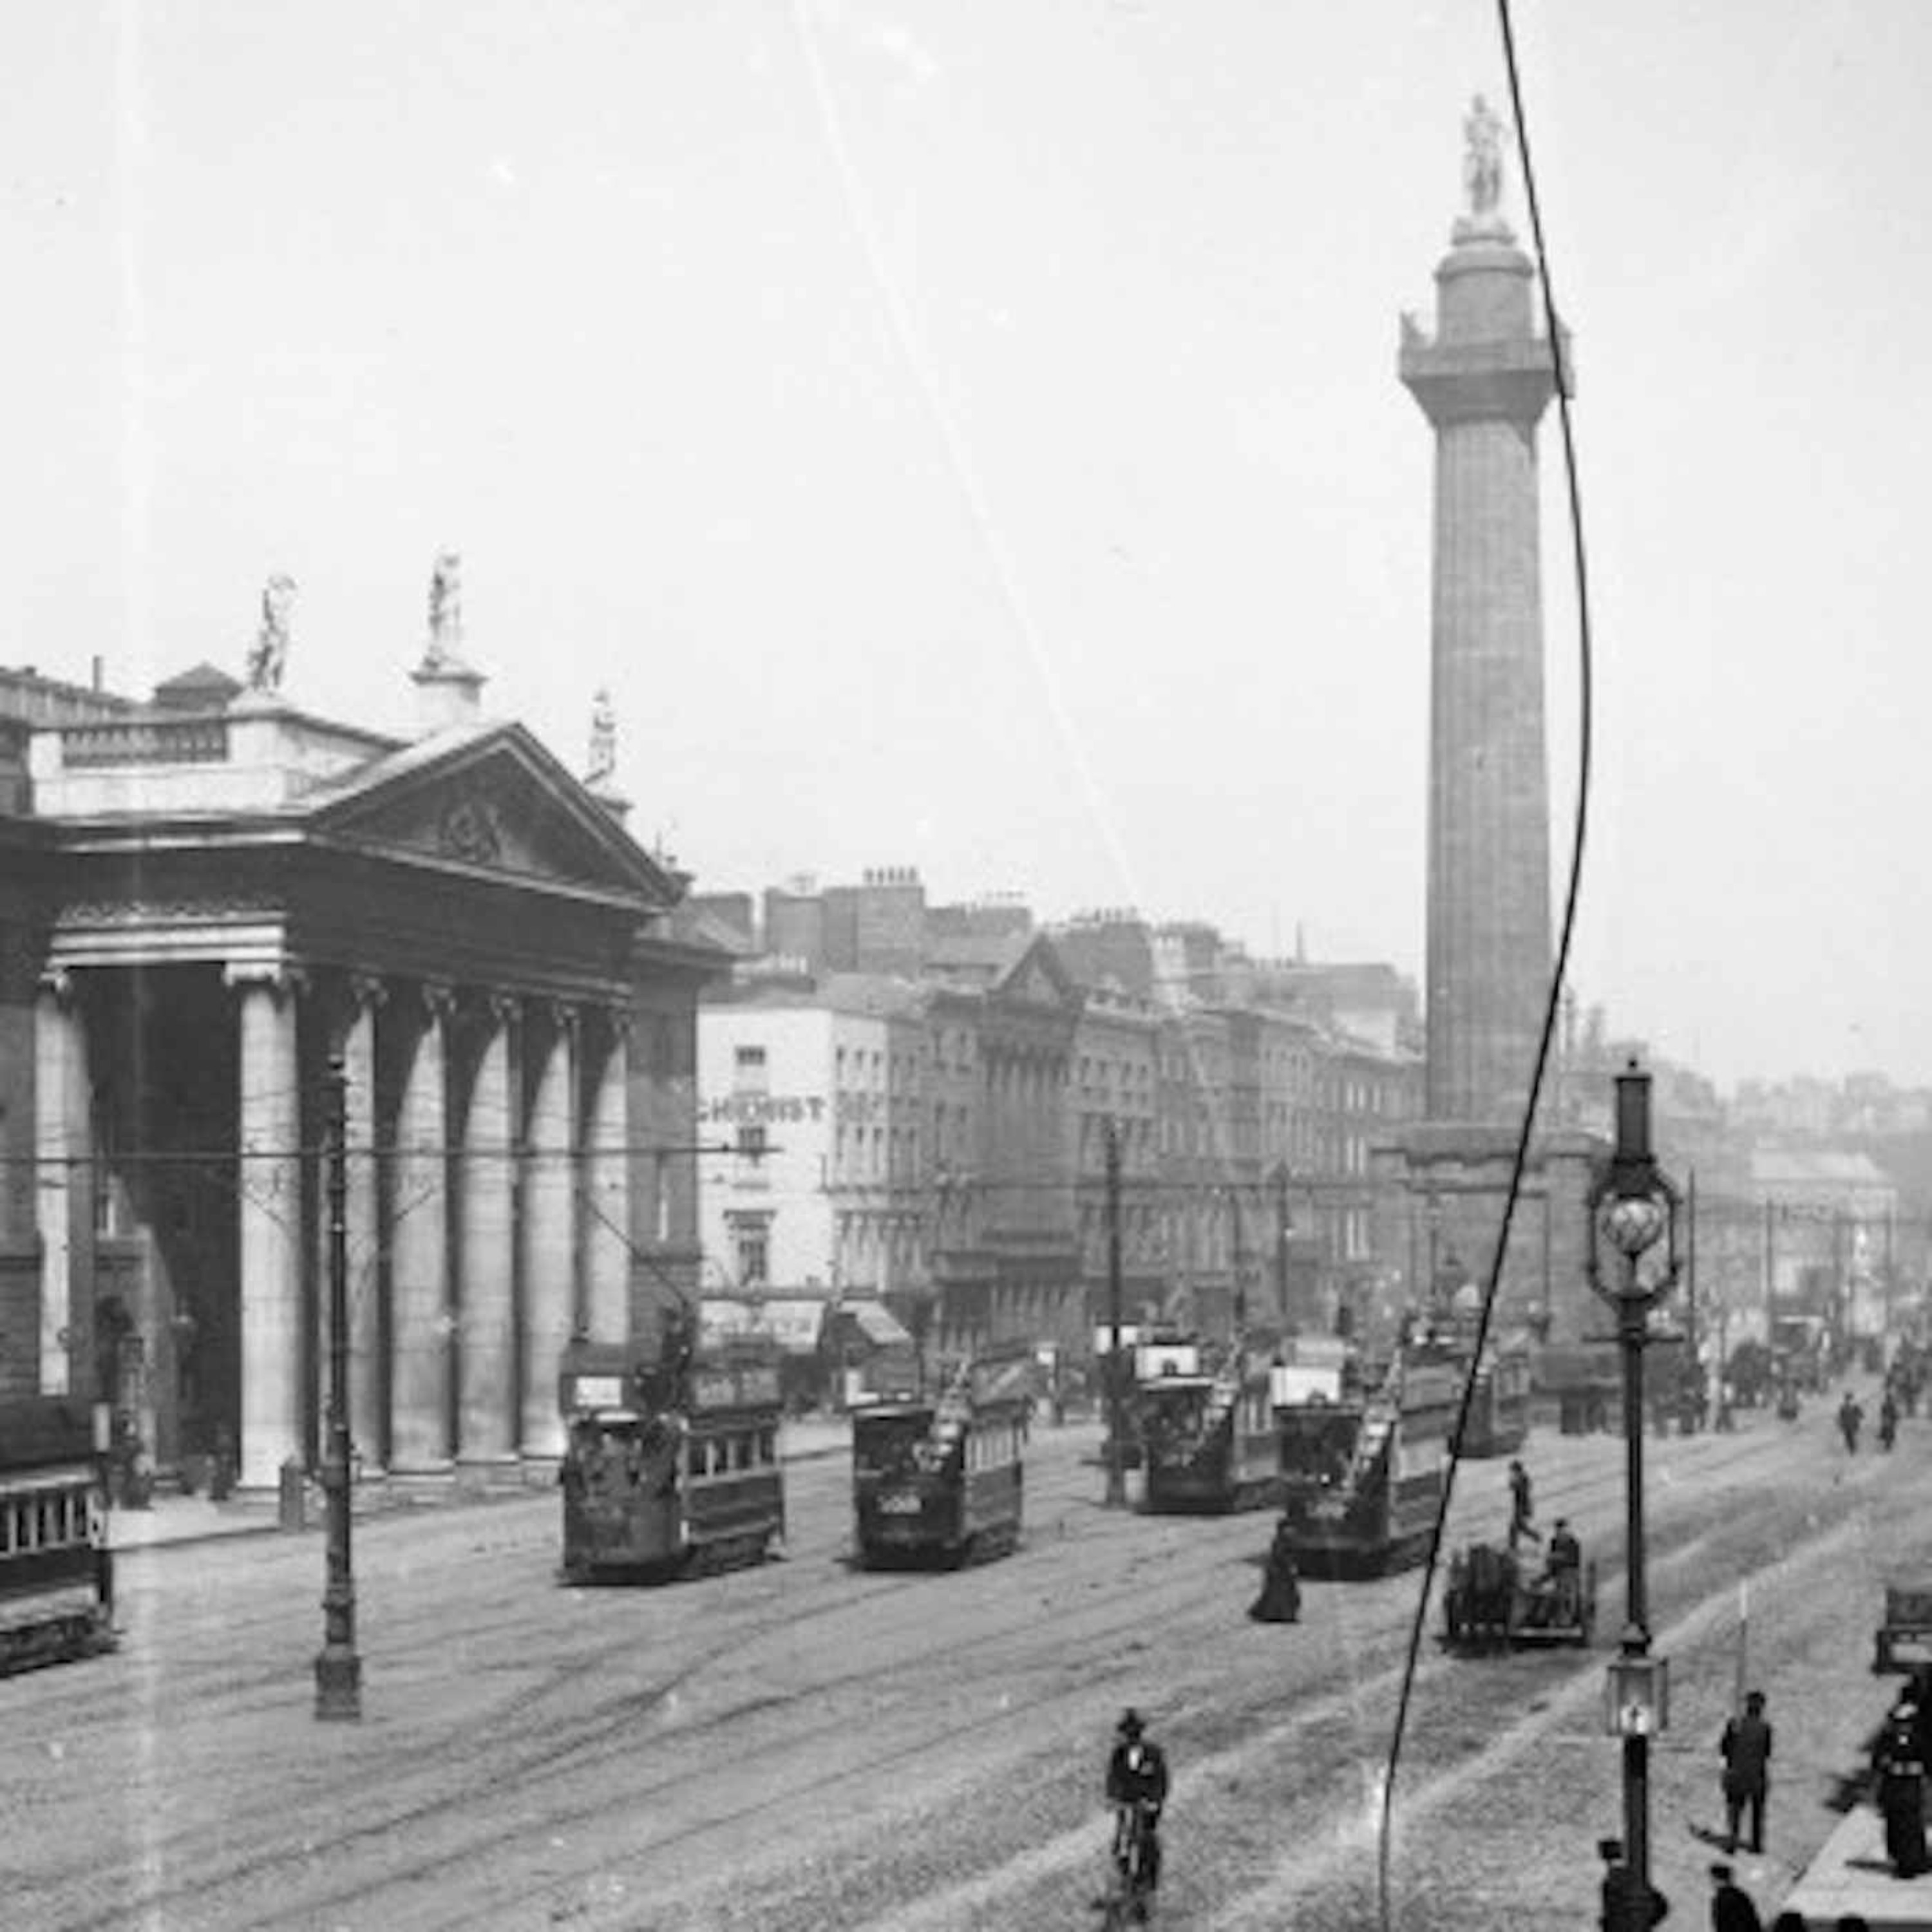 Sights, Sounds & Smells: Life in Dublin on the Eve of the 1916 Rising [from the archives]